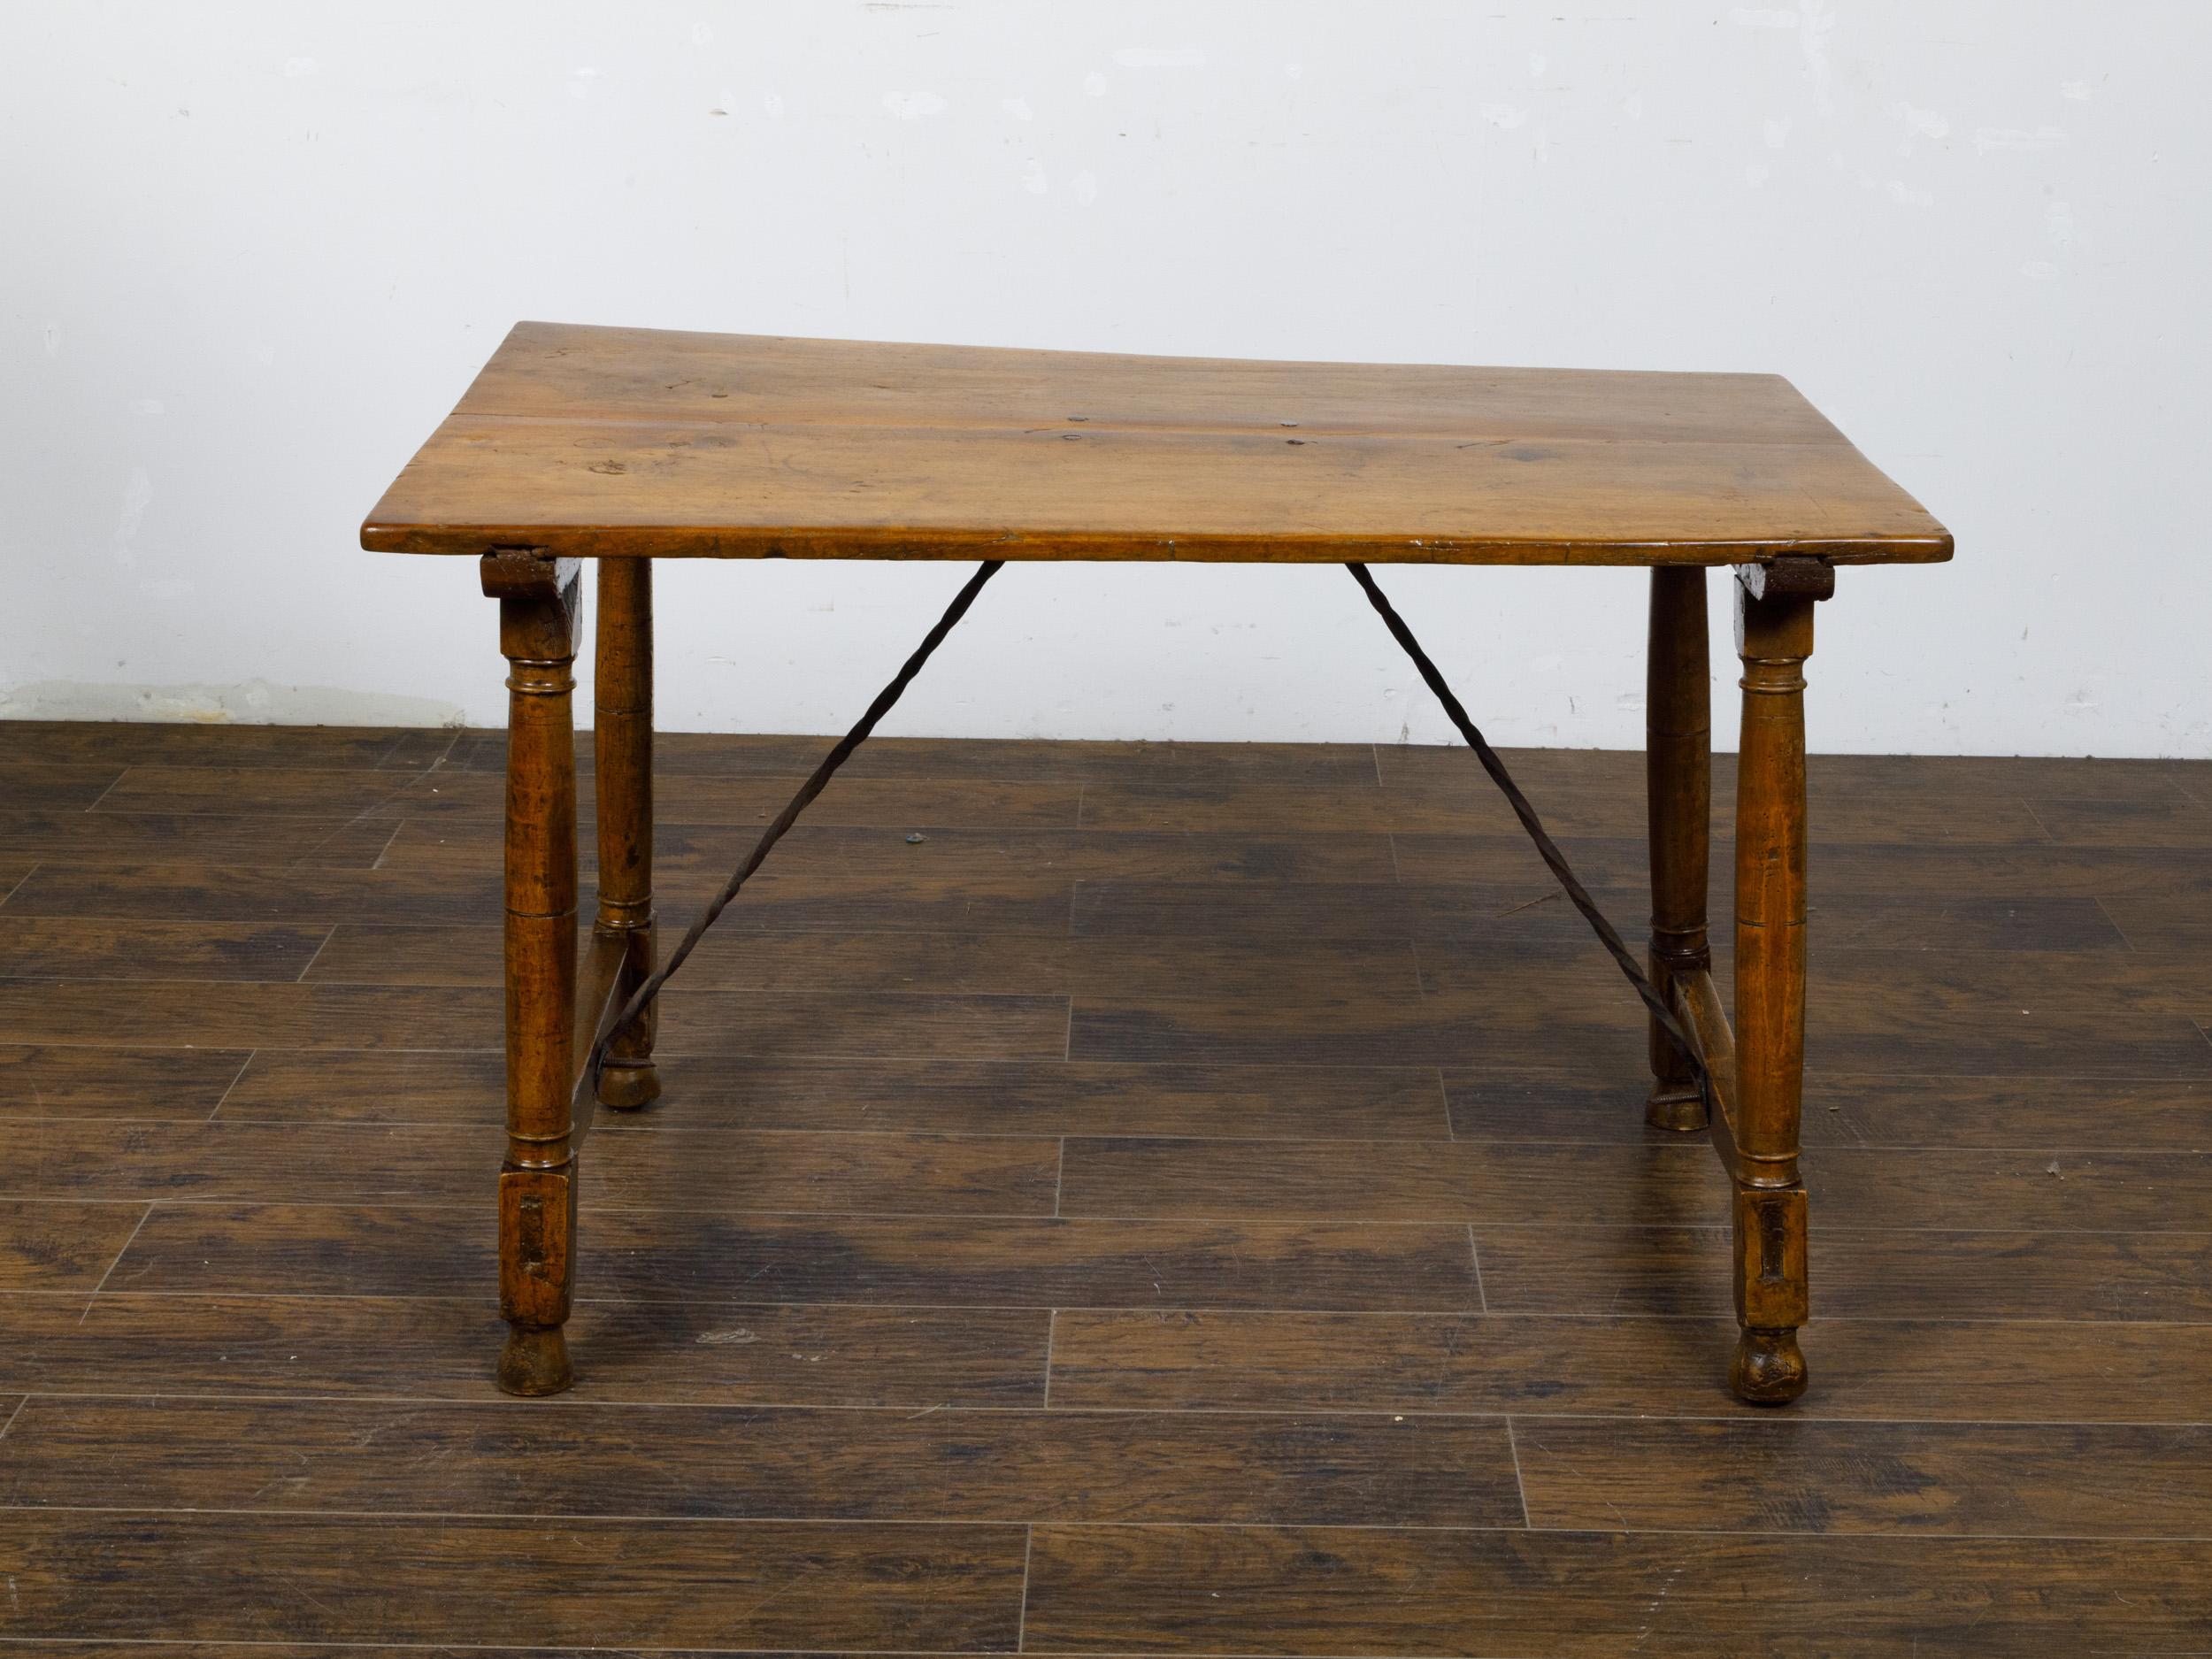 Italian 19th Century Walnut Console Table with Column Legs and Iron Stretchers For Sale 12